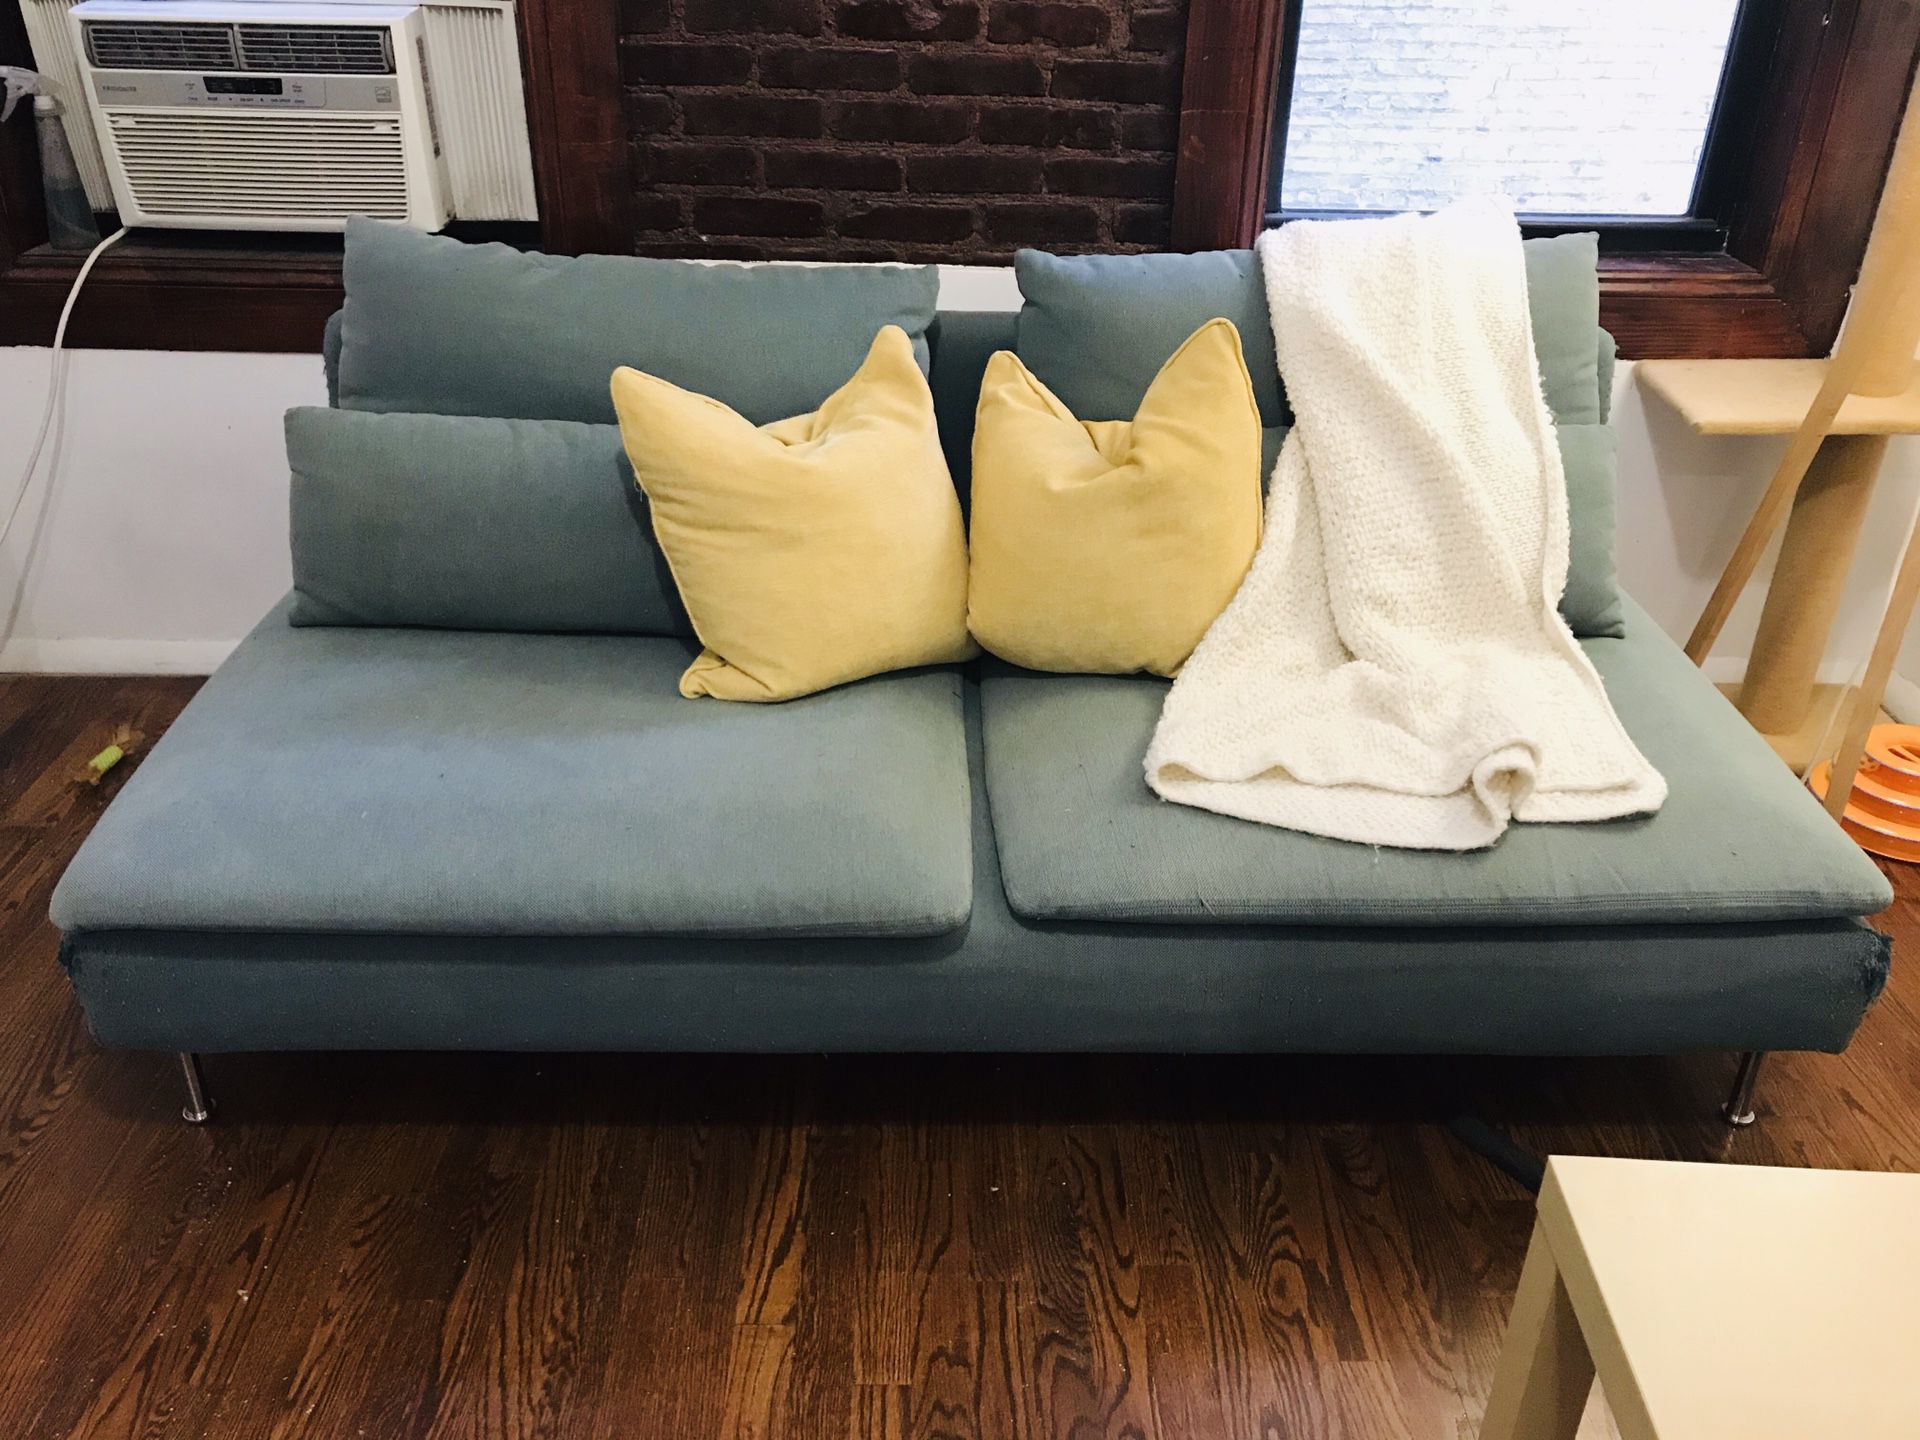 Couch Originally $600 - Pillows and Throw Included